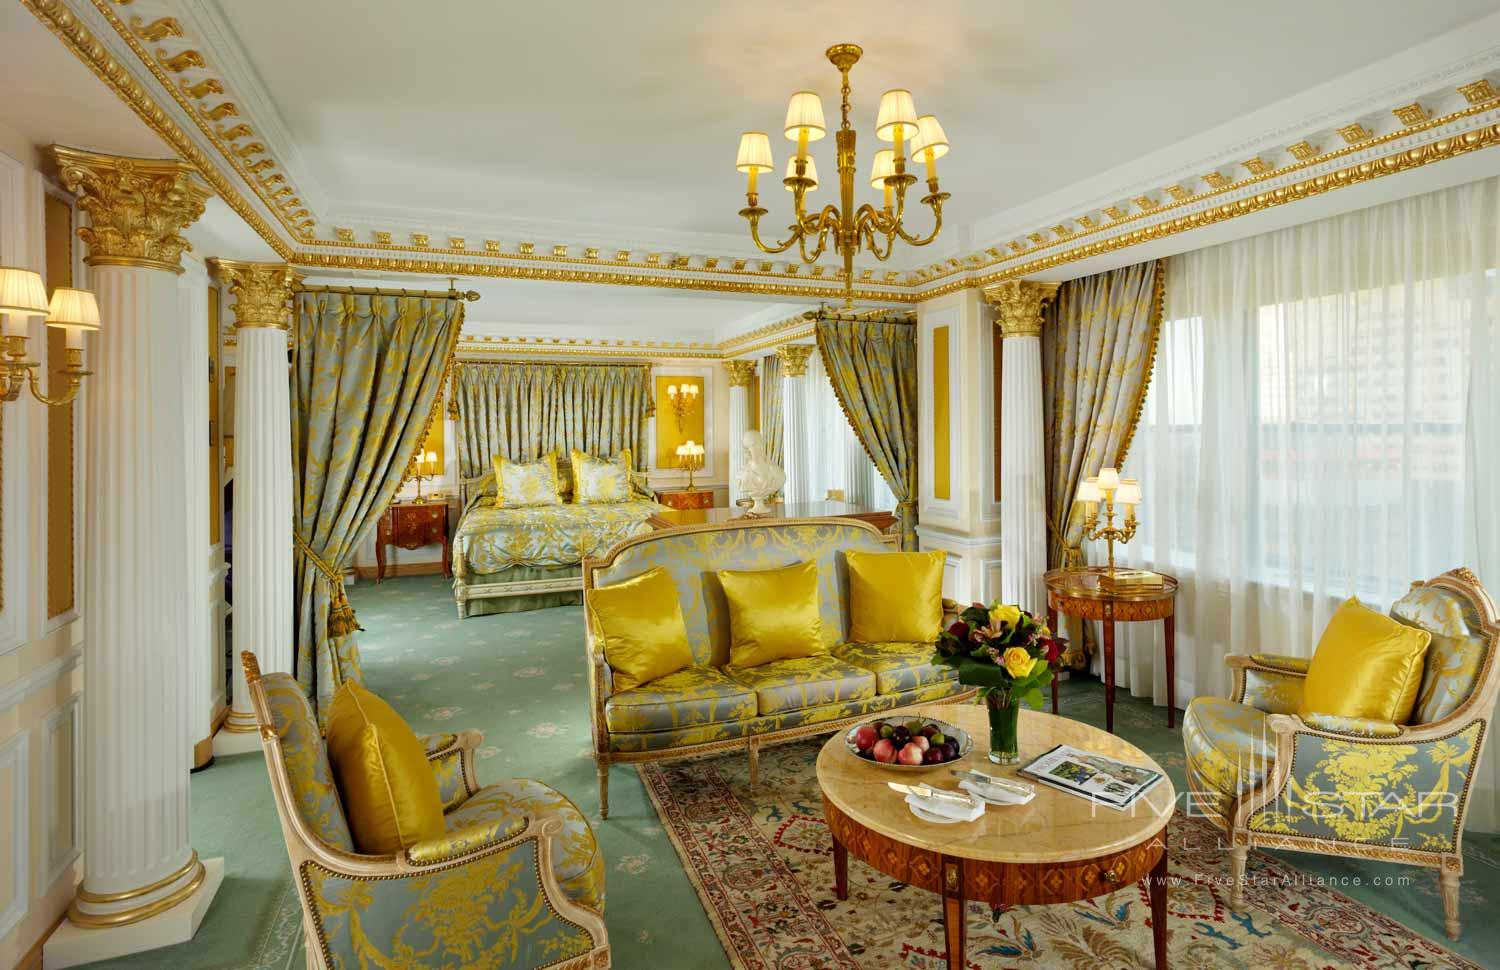 Royal Suite at The Towers at Lotte New York Palace, United States